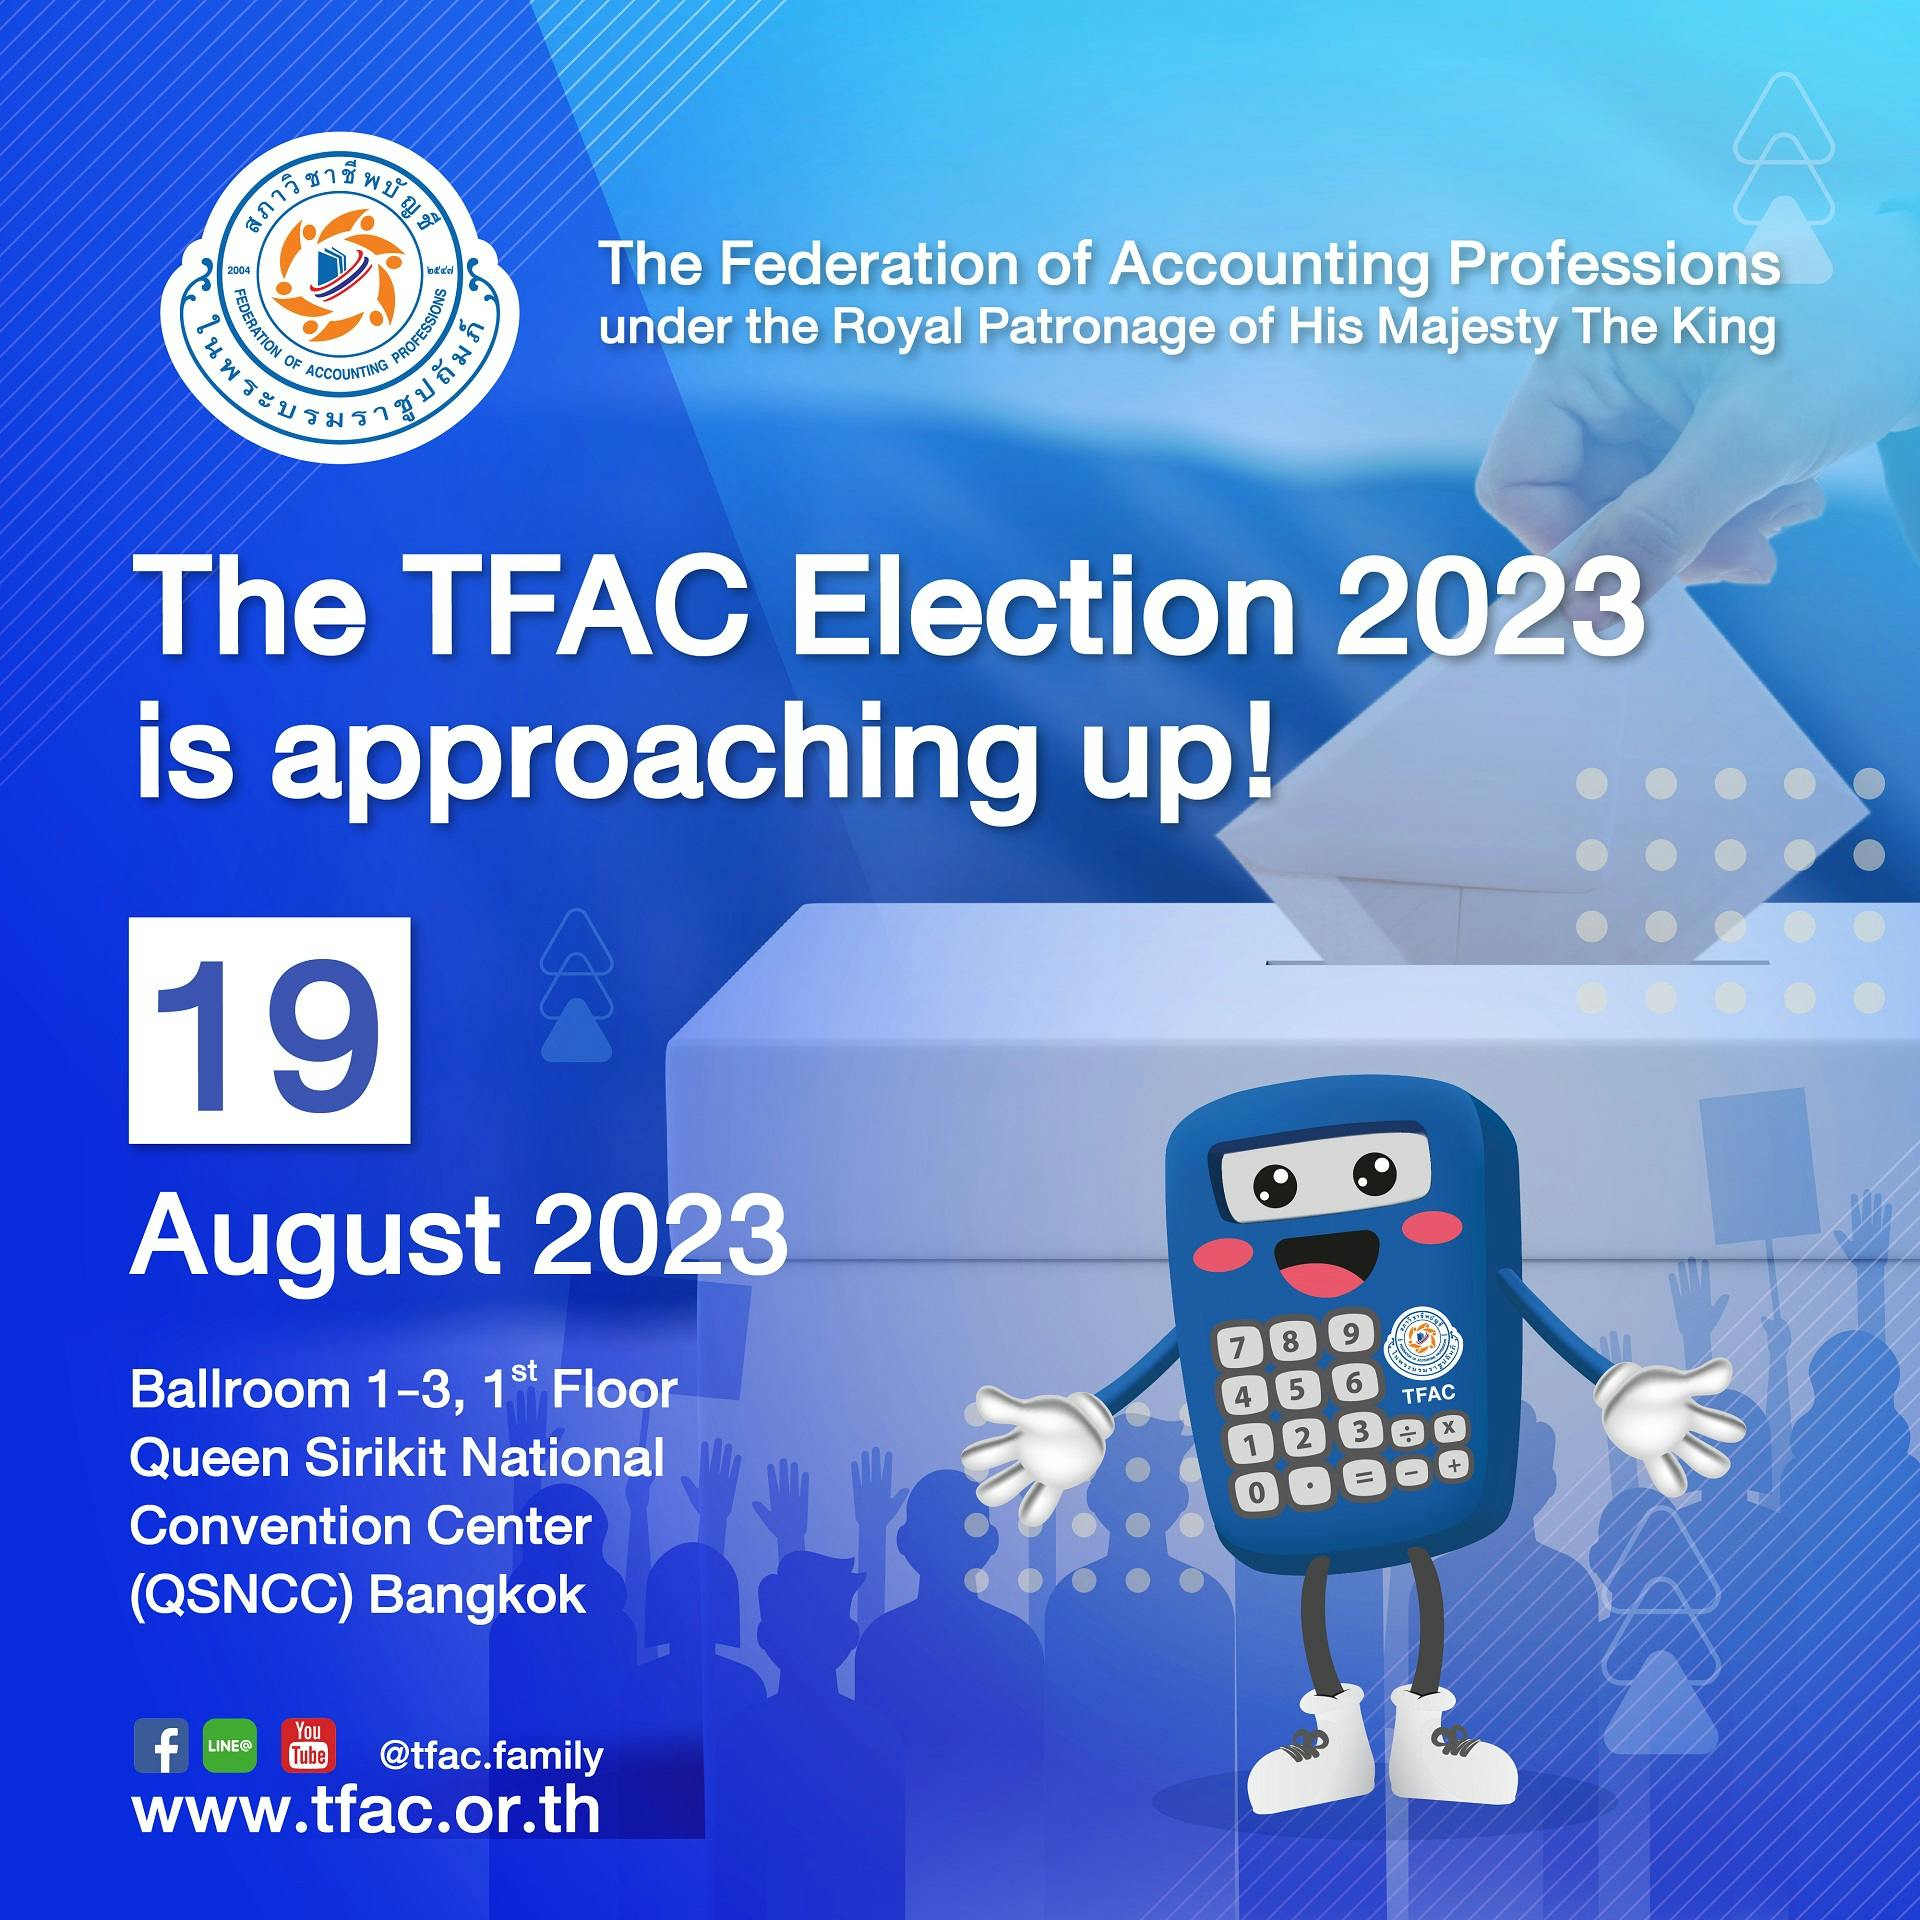 The TFAC Election 2023